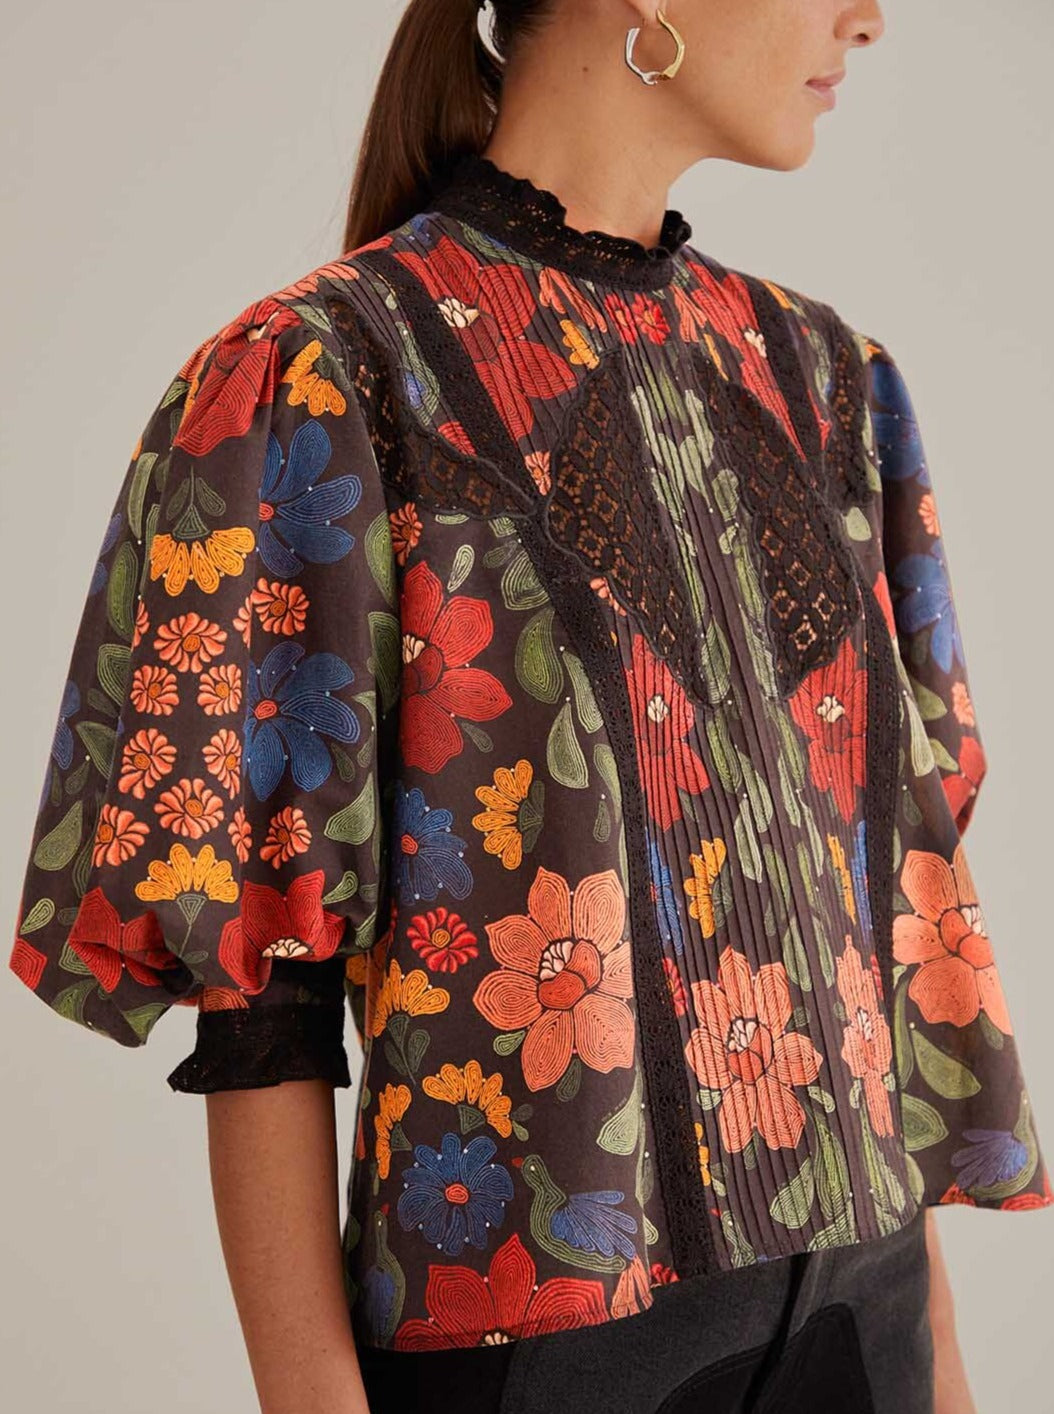 Black Stitched Flowers Blouse